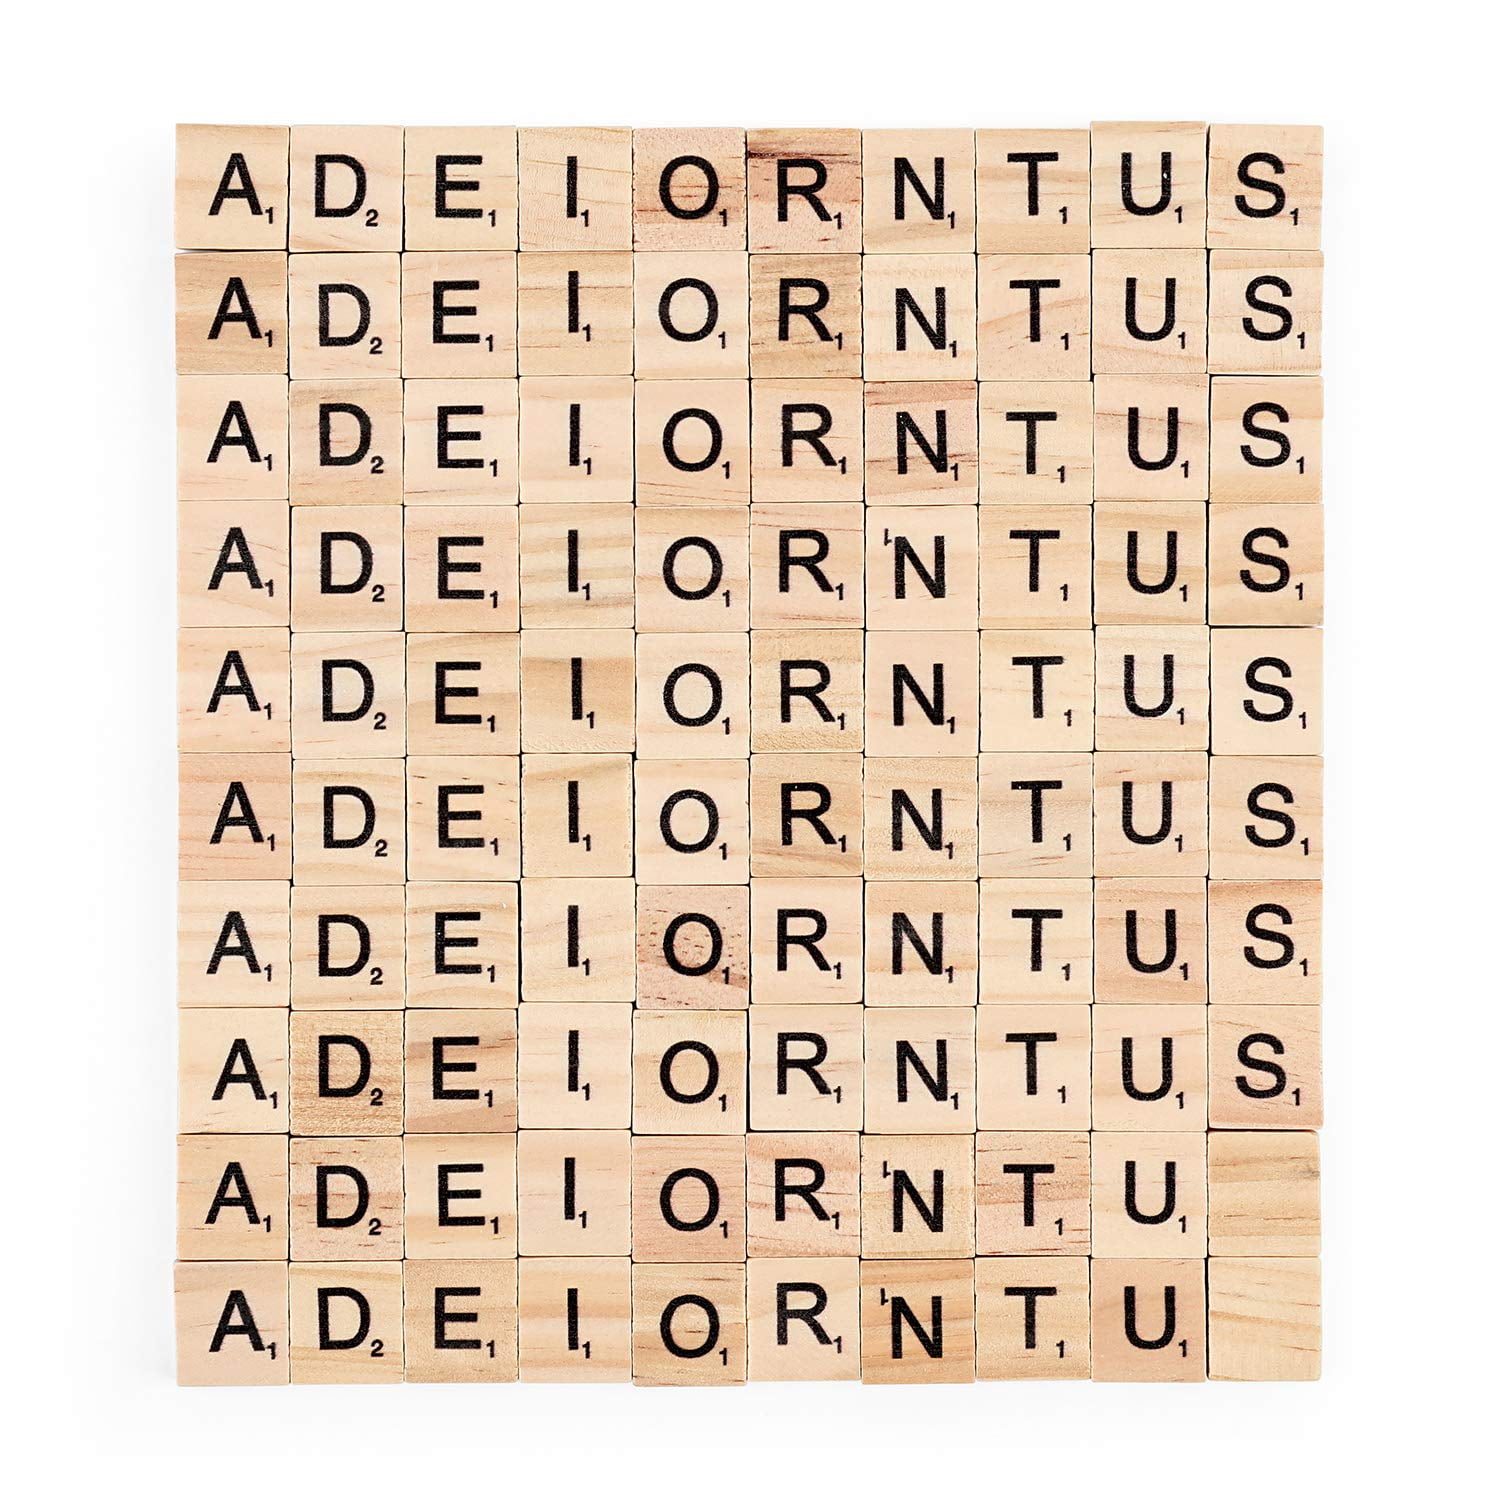 Wood Craft Scrabble Letters Word Tiles Magicfly 500Pcs Scrabble Tiles A-Z for Wood Gift Decoration & Scrabble Crossword Game